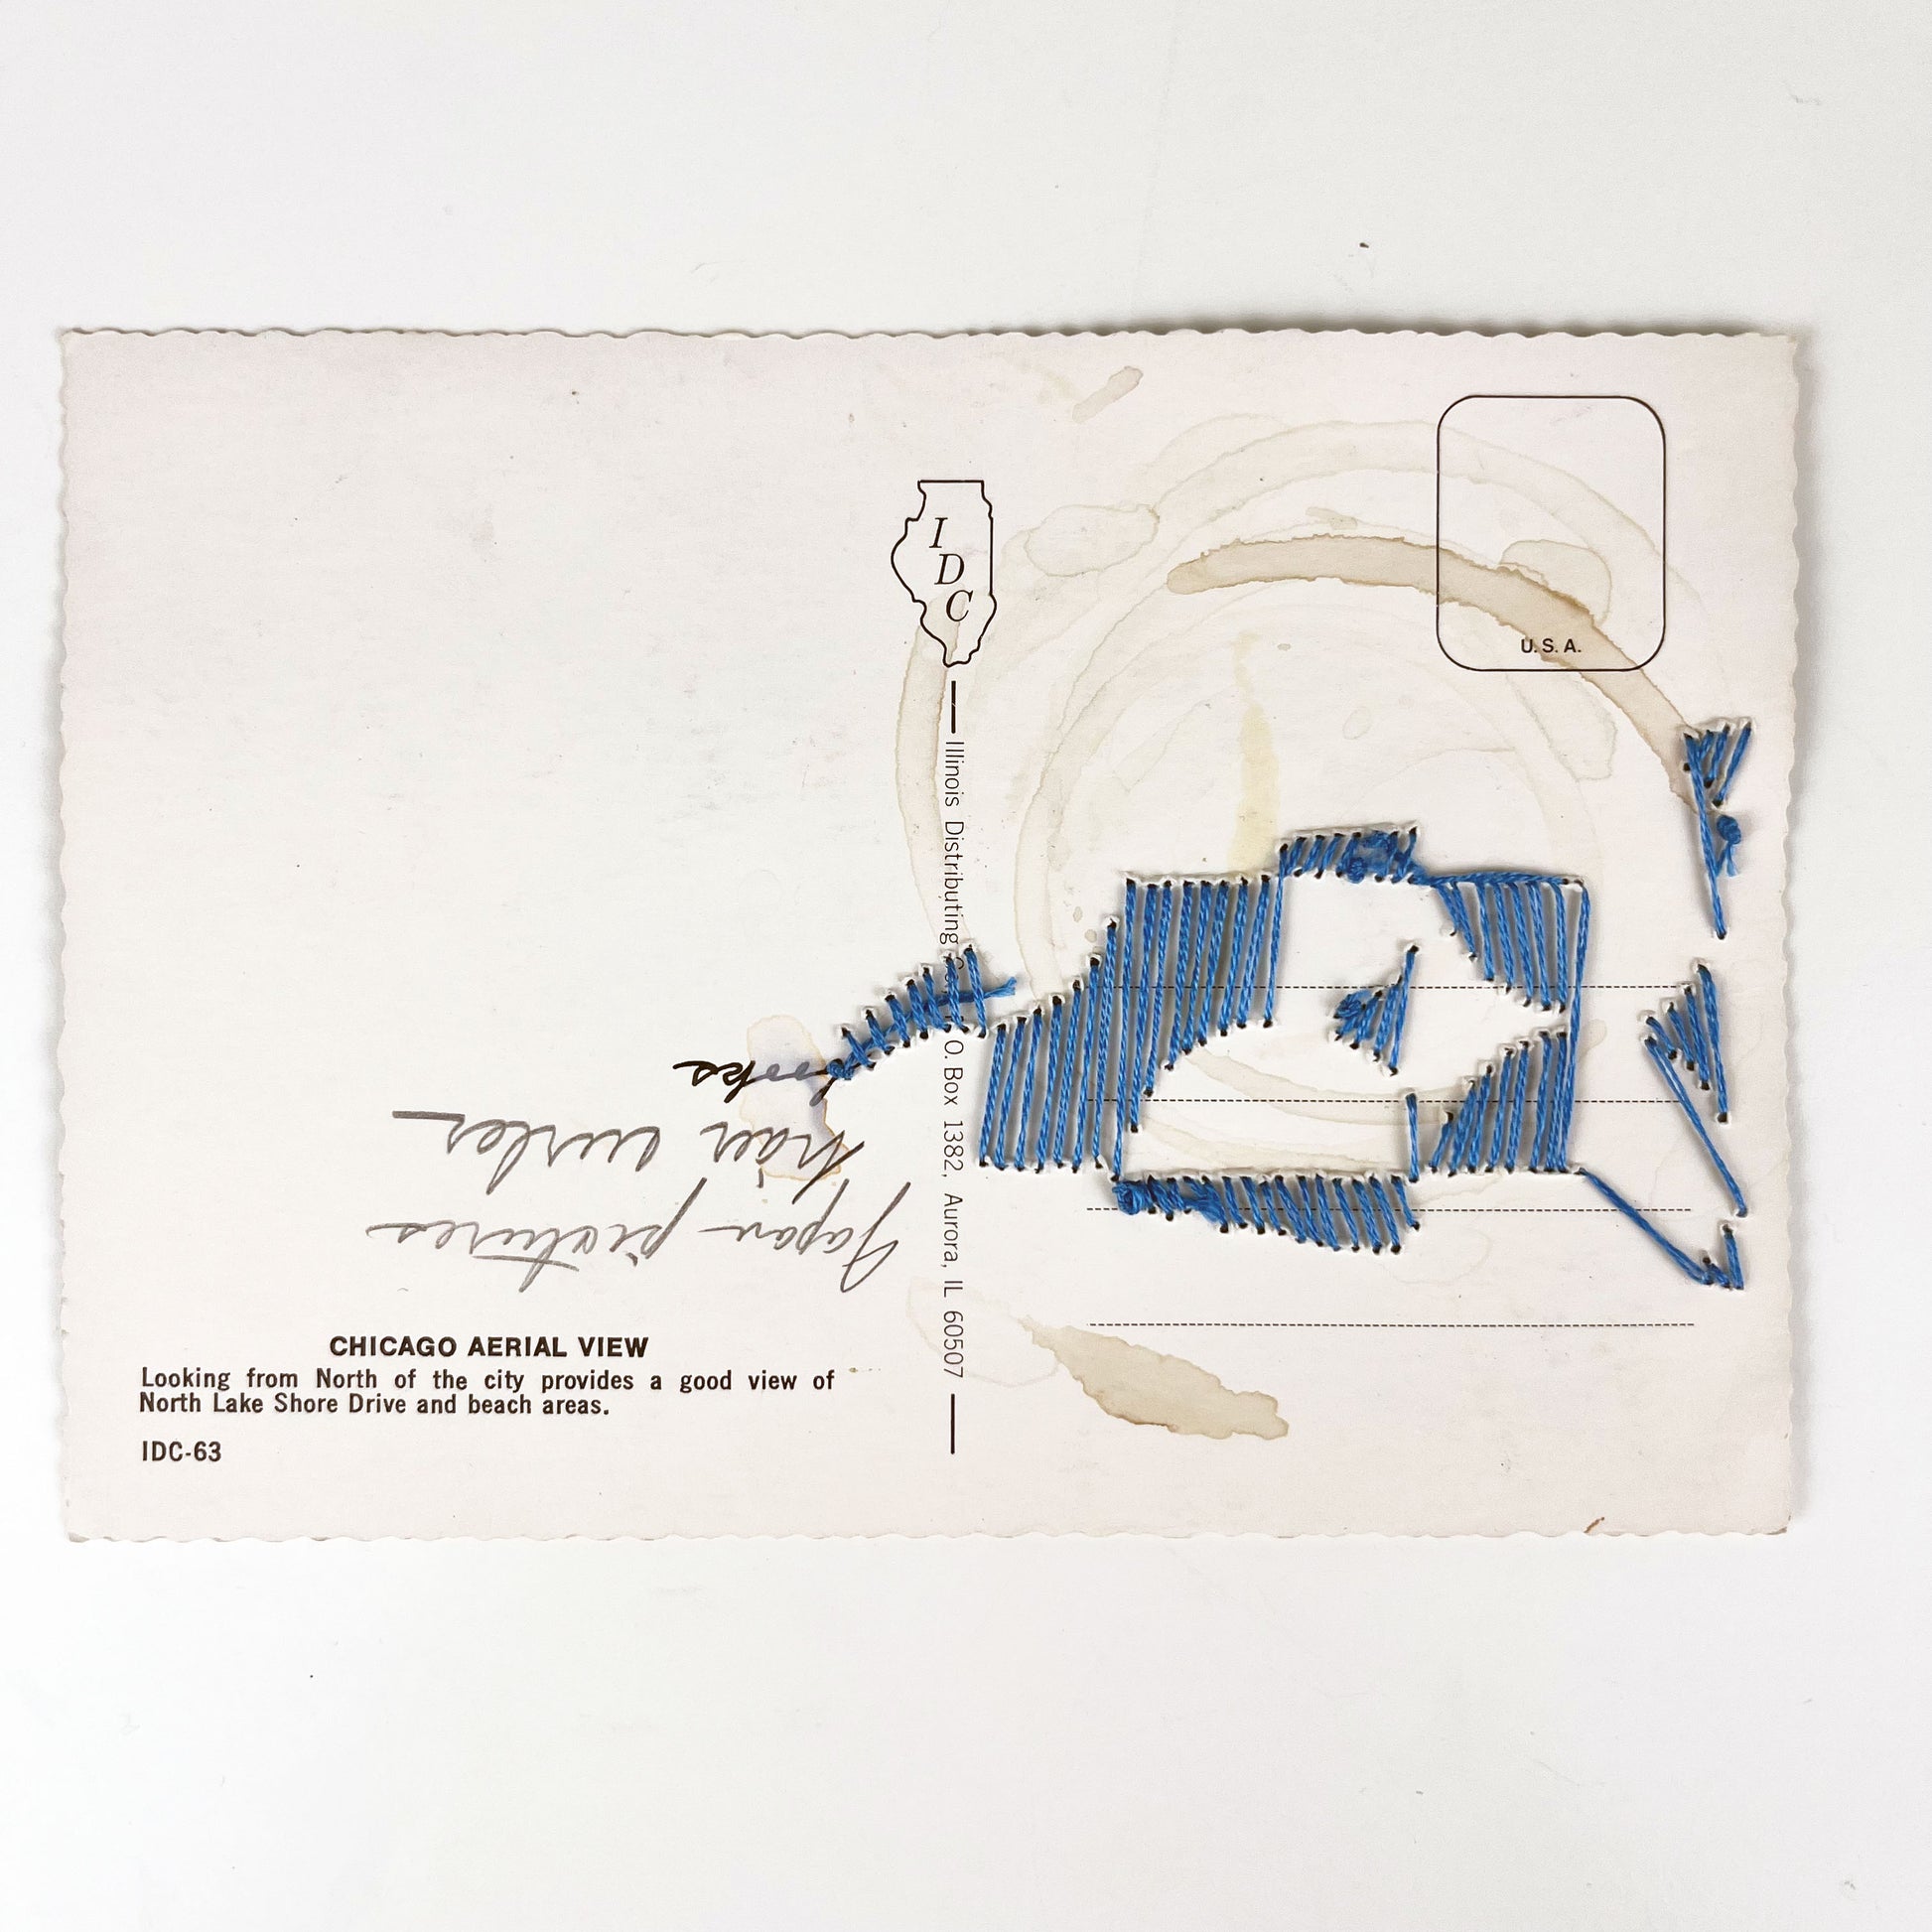 back side of a postcard with backside of stitched pattern showing, the postcard has coffee ring stains and a handwritten list on it